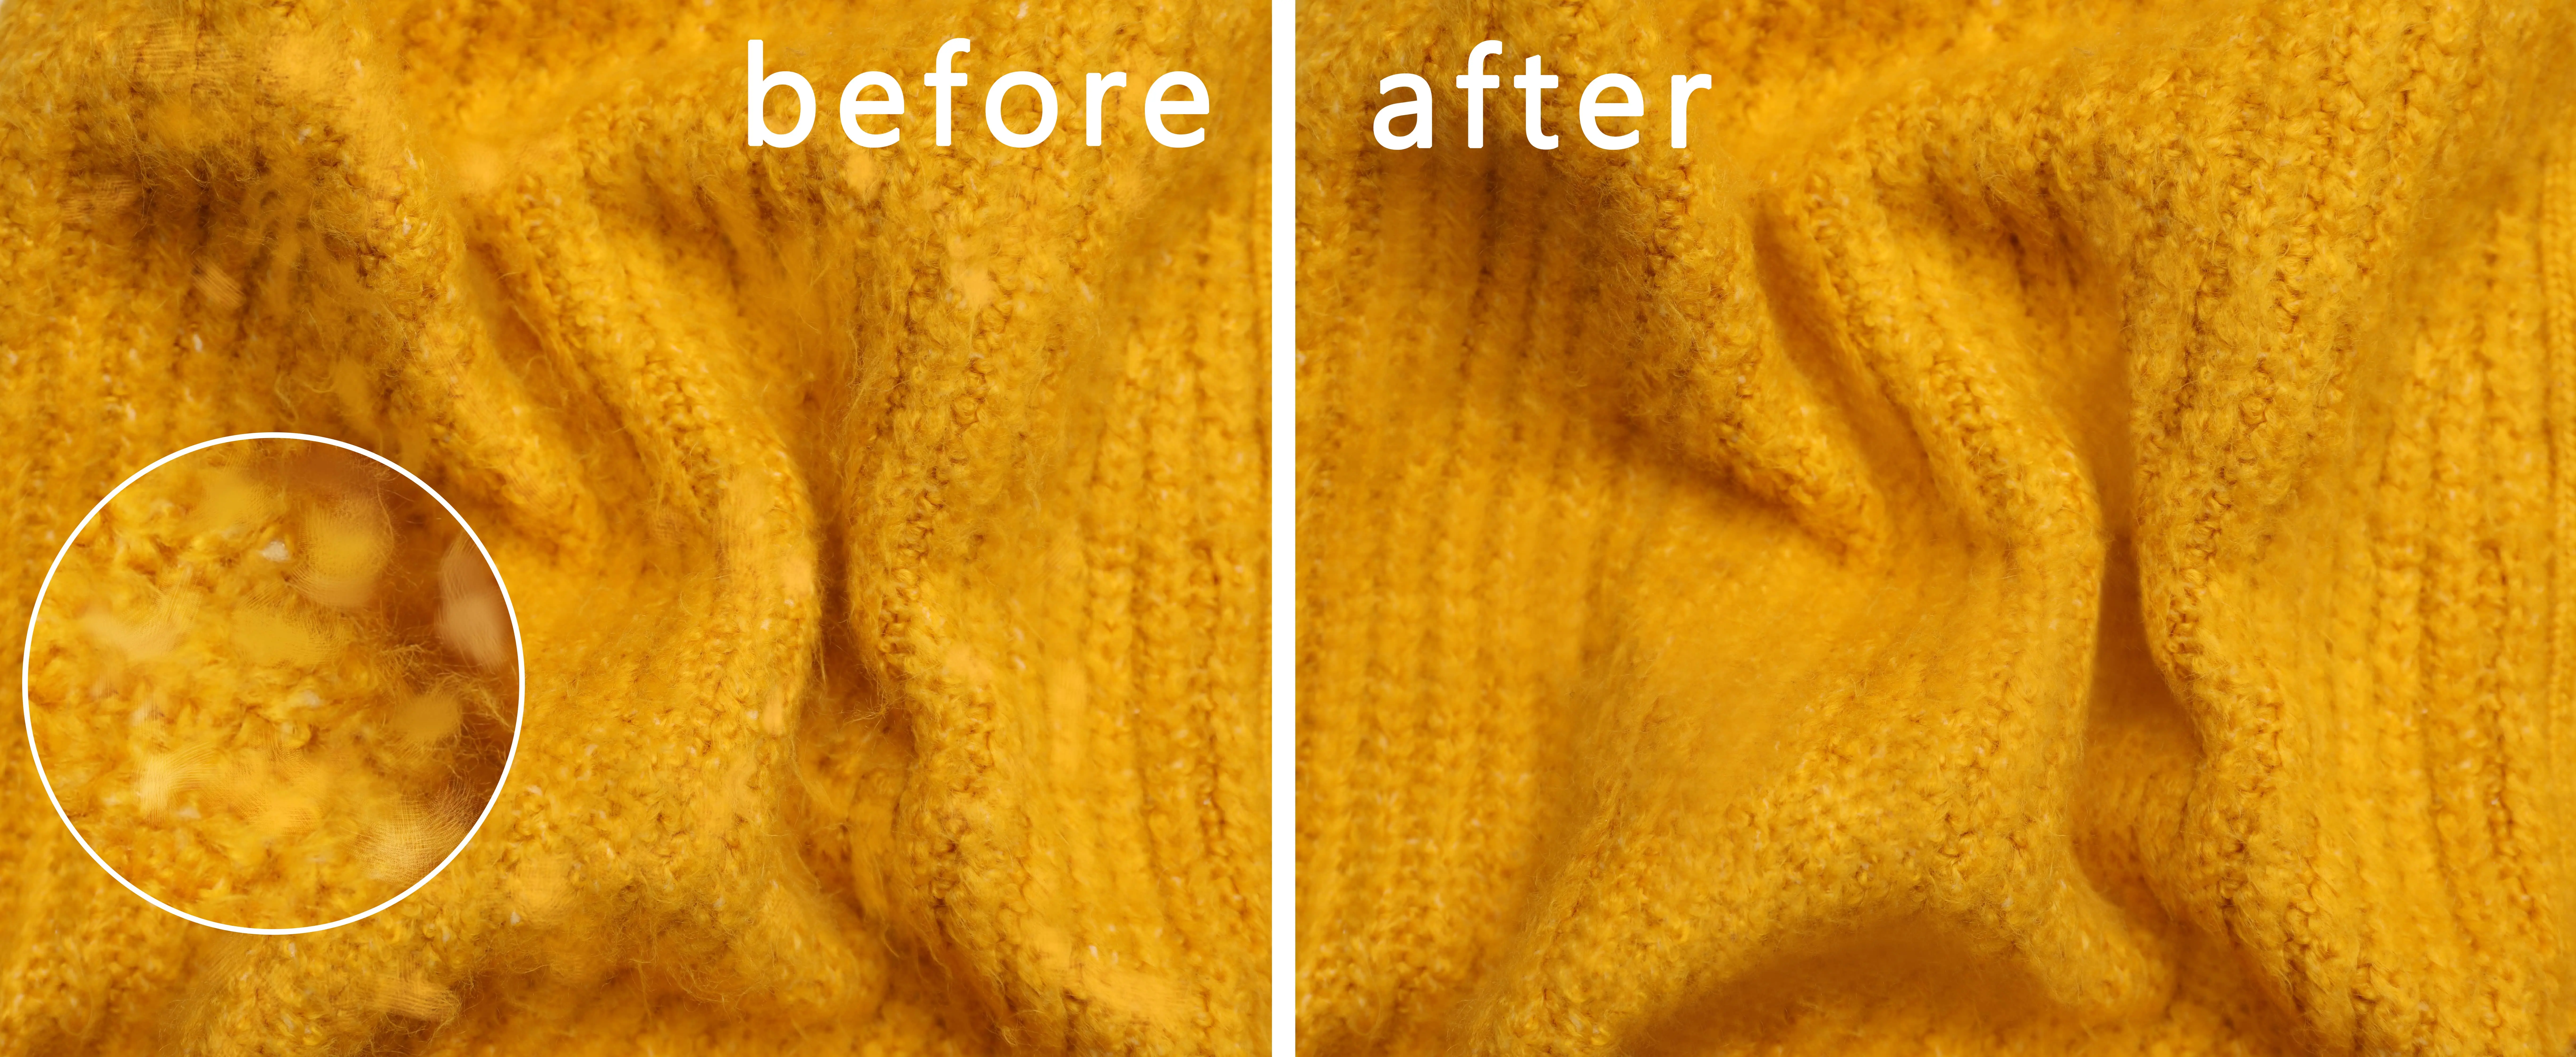 before after fabric pilling